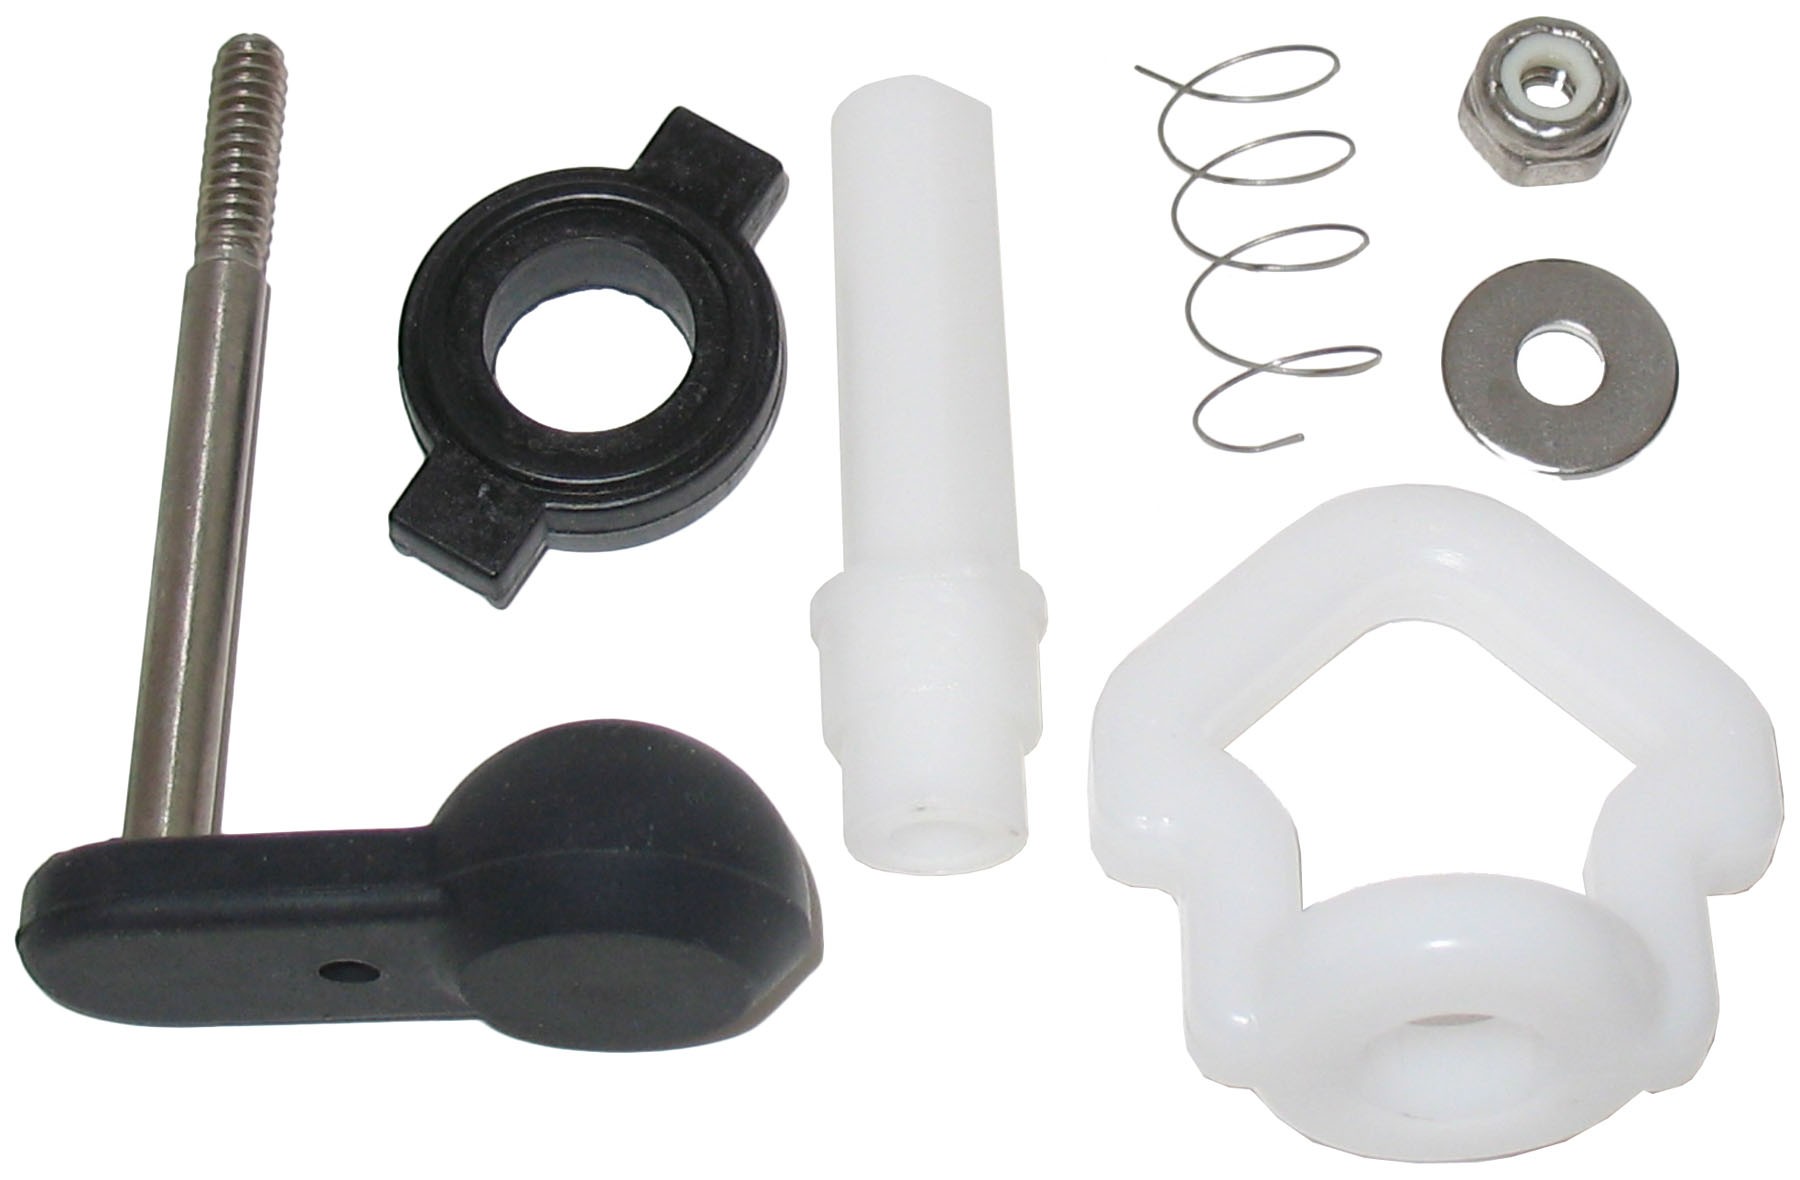 Replacement valve kit for Flo-Star